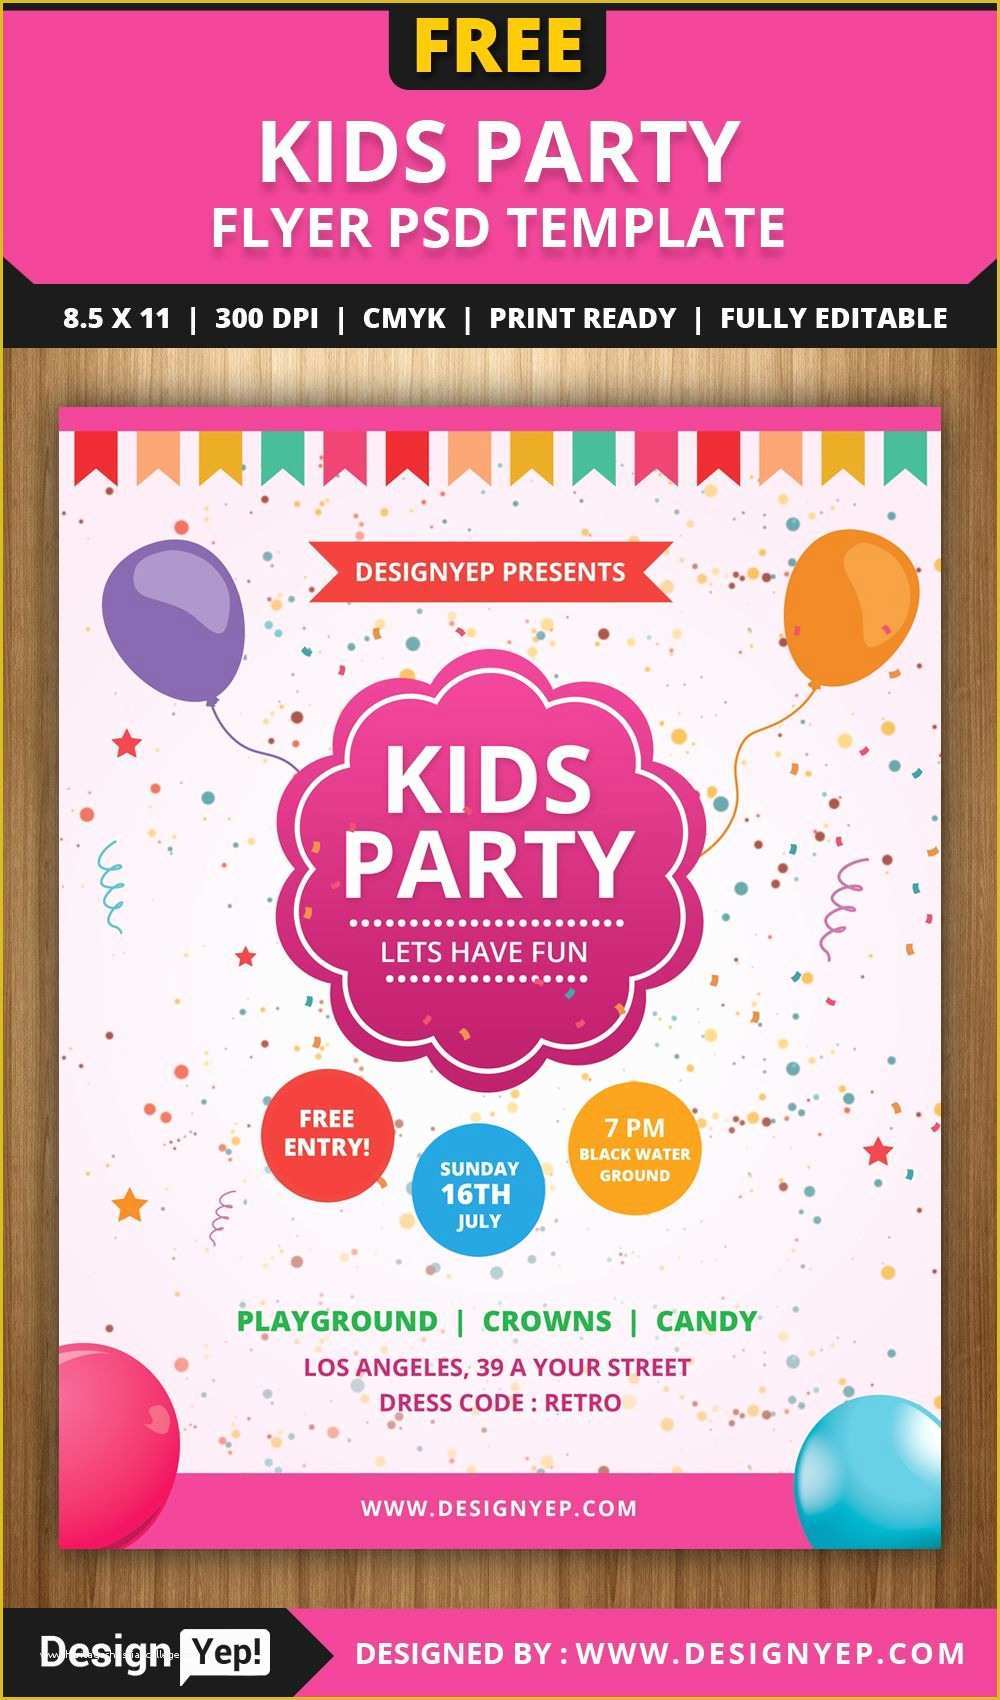 Free Brochure Templates for Students Of Free Kids Party Flyer Psd Template